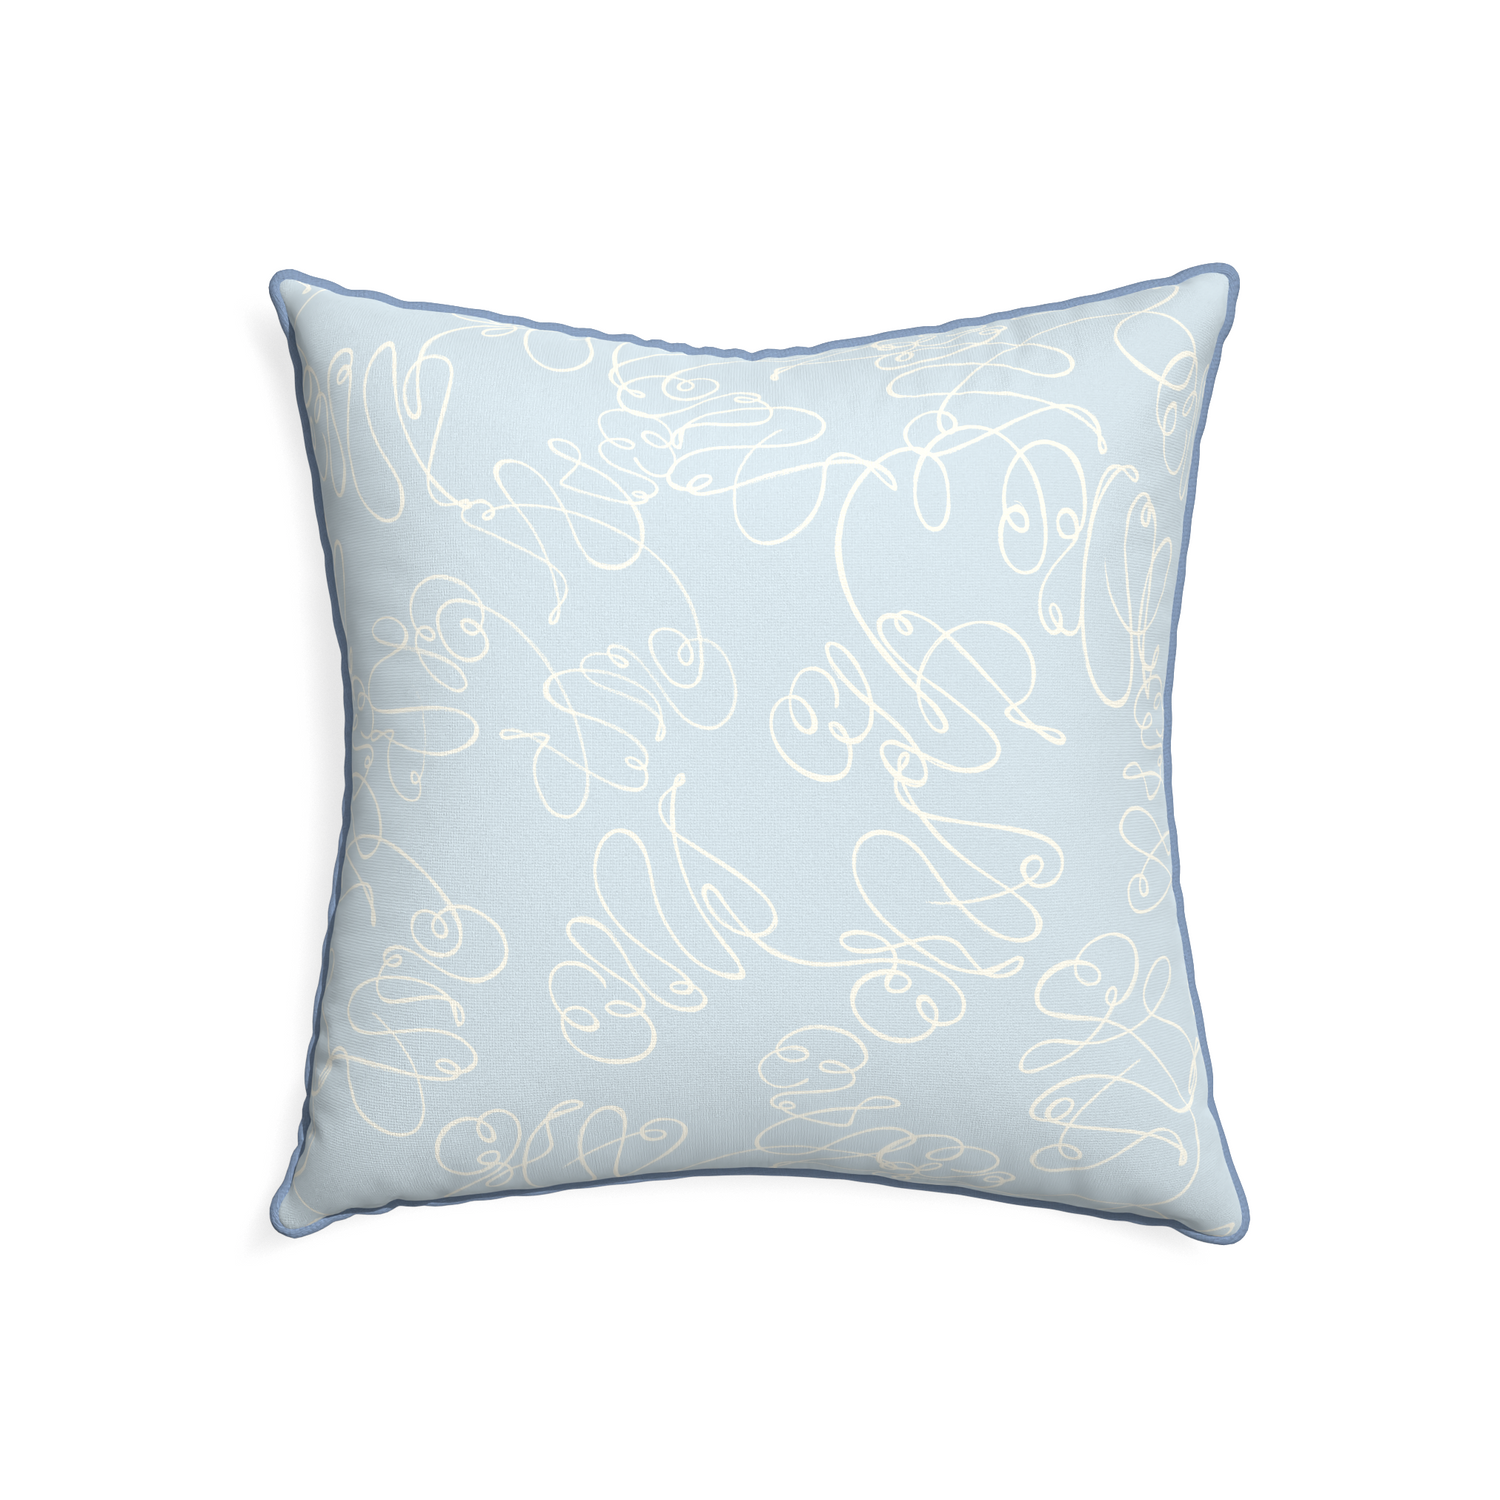 22-square mirabella custom powder blue abstractpillow with sky piping on white background